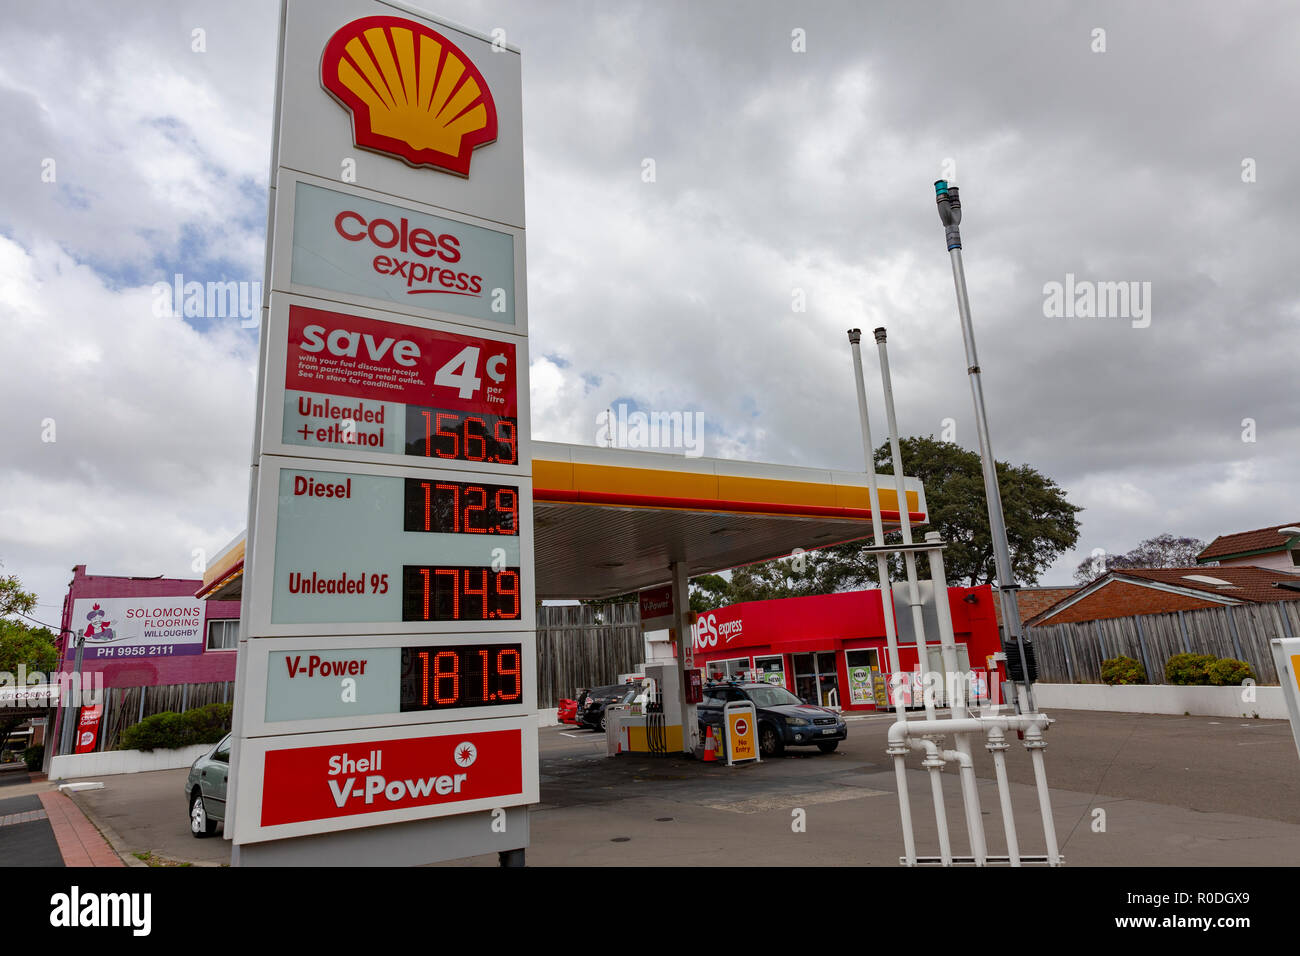 Shell V Power High Resolution Stock Photography and Images - Alamy